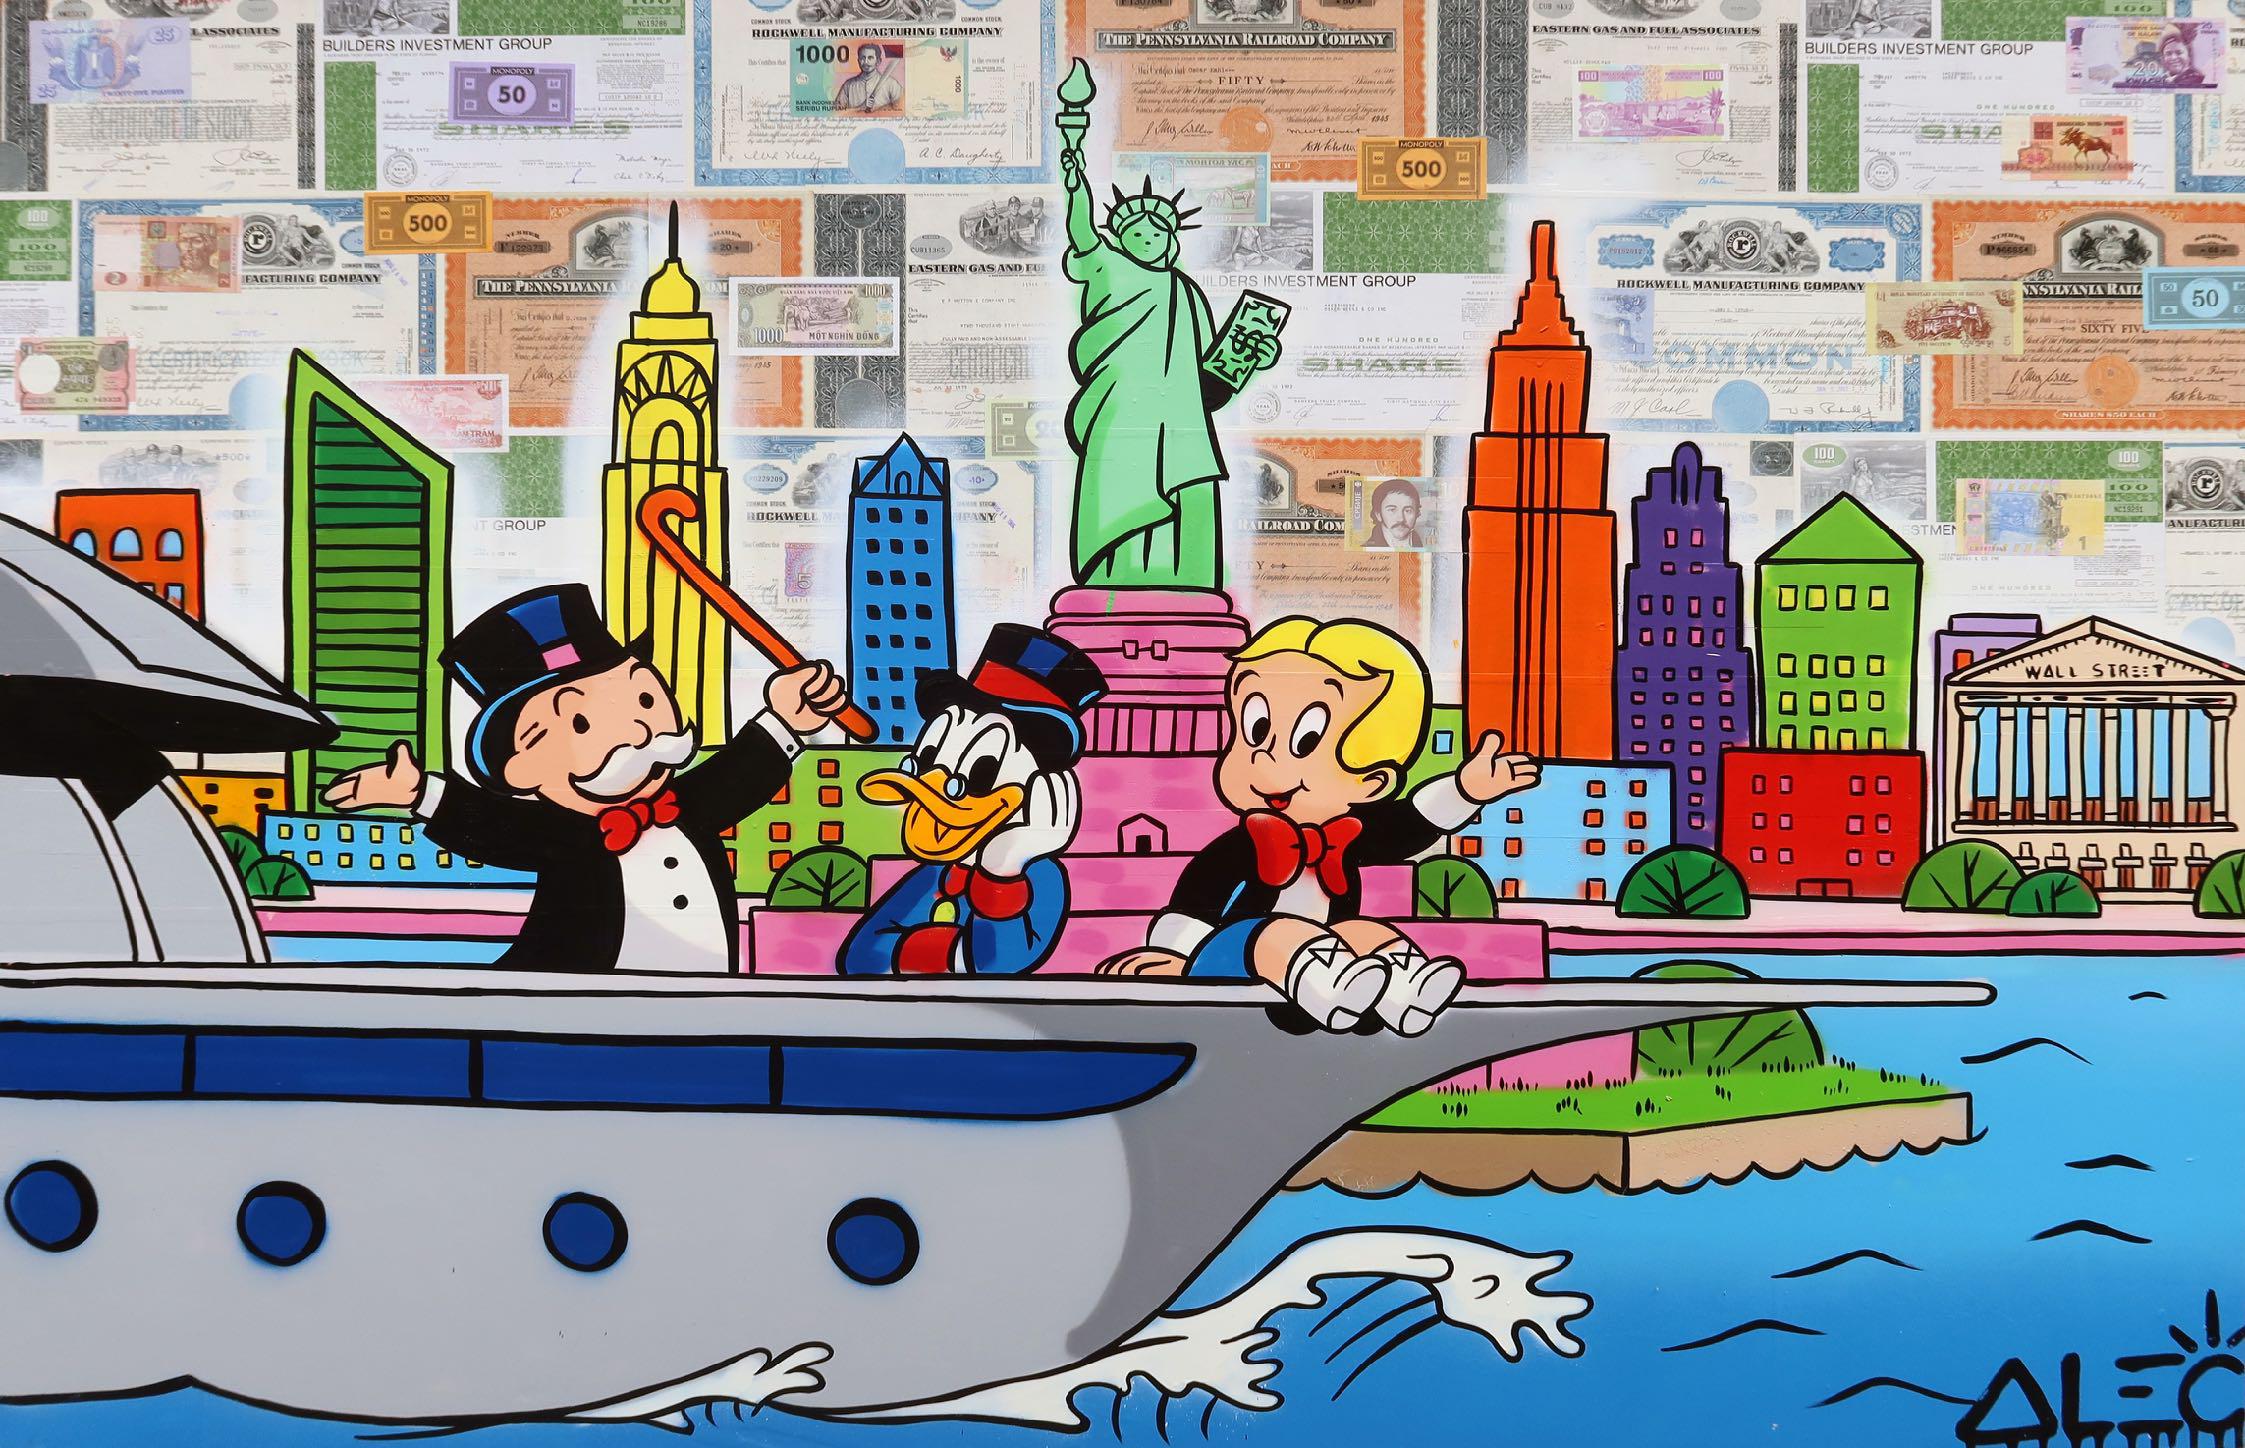 $ Team Yacht Cruising Past NYC - Alec Monopoly - Eden Gallery